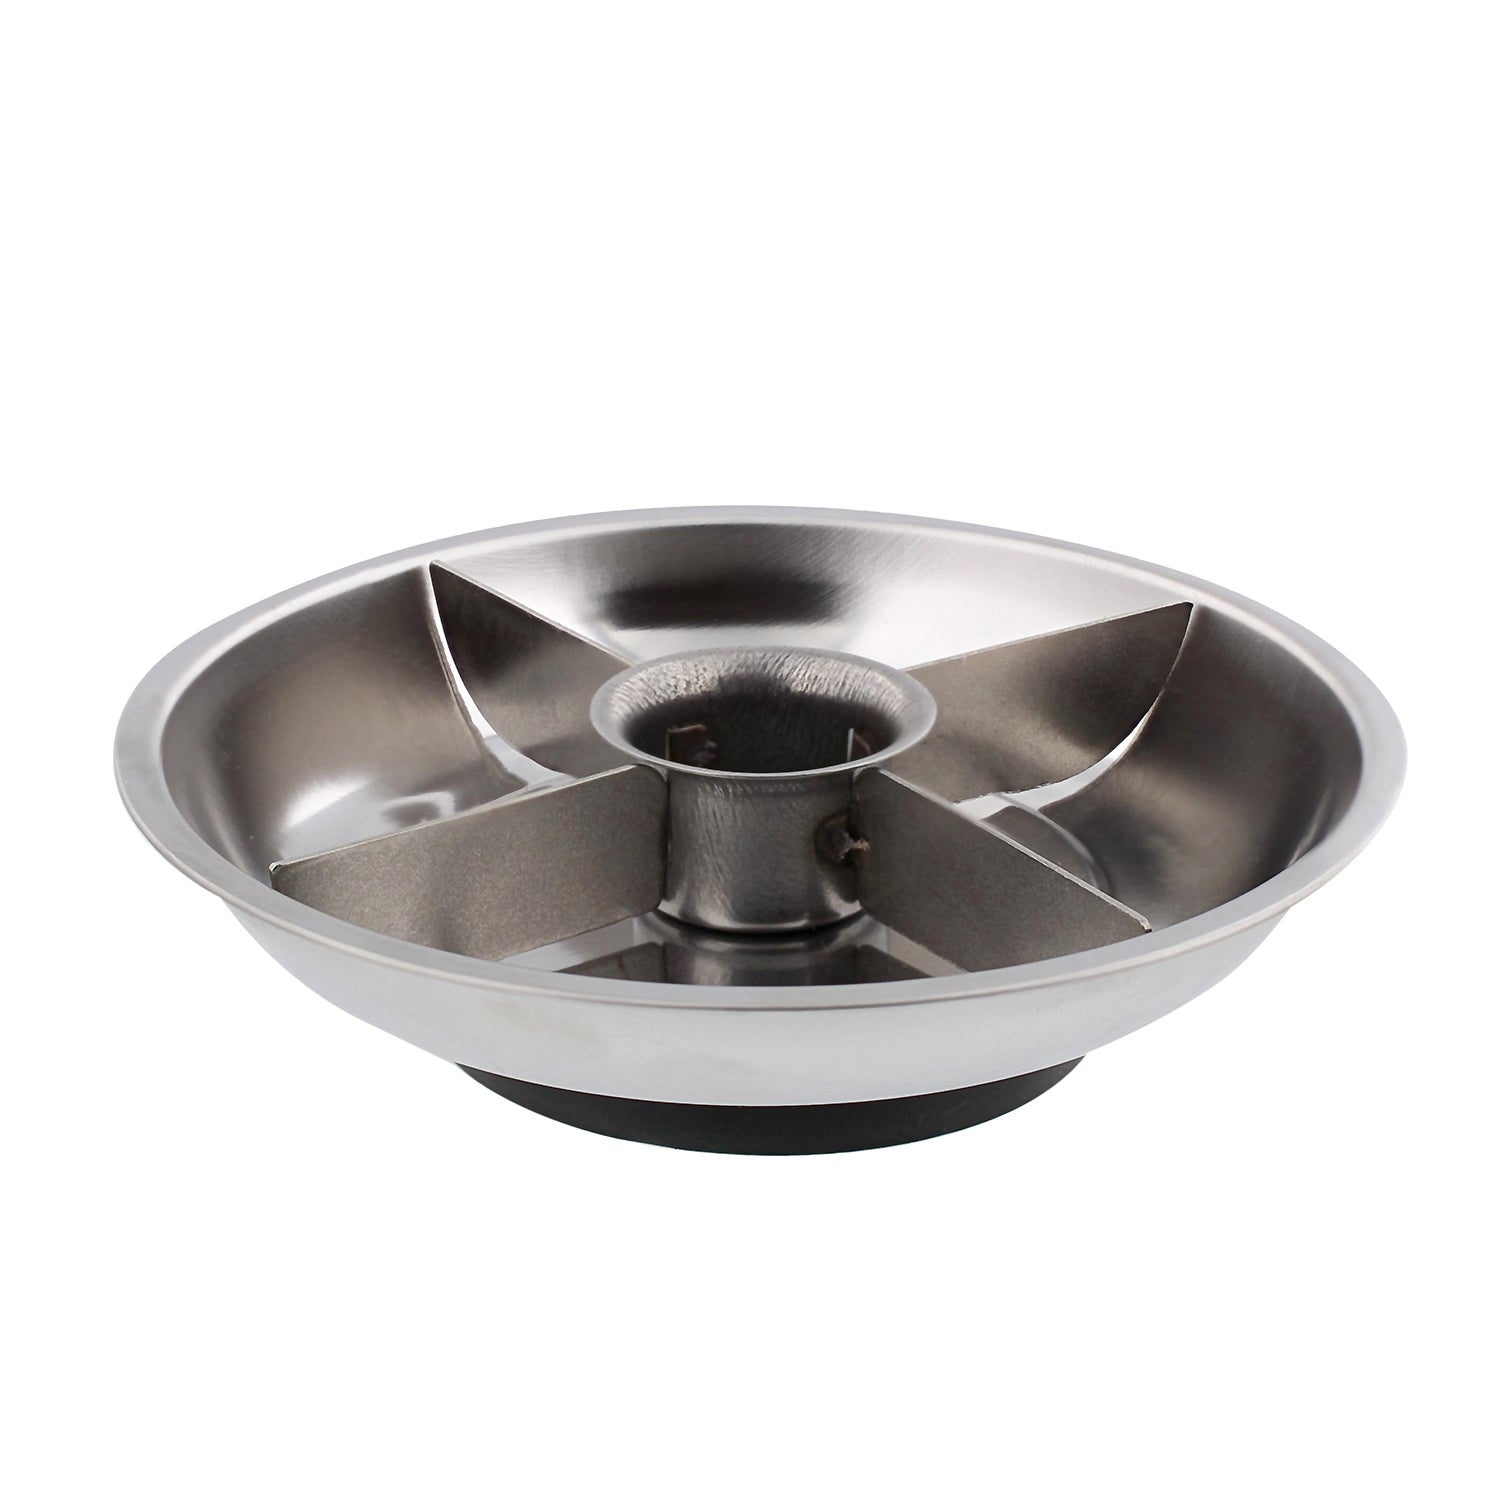 Automotive Magnetic Tray Small Parts Dish 6in Metal Magnet Bowl Holder –